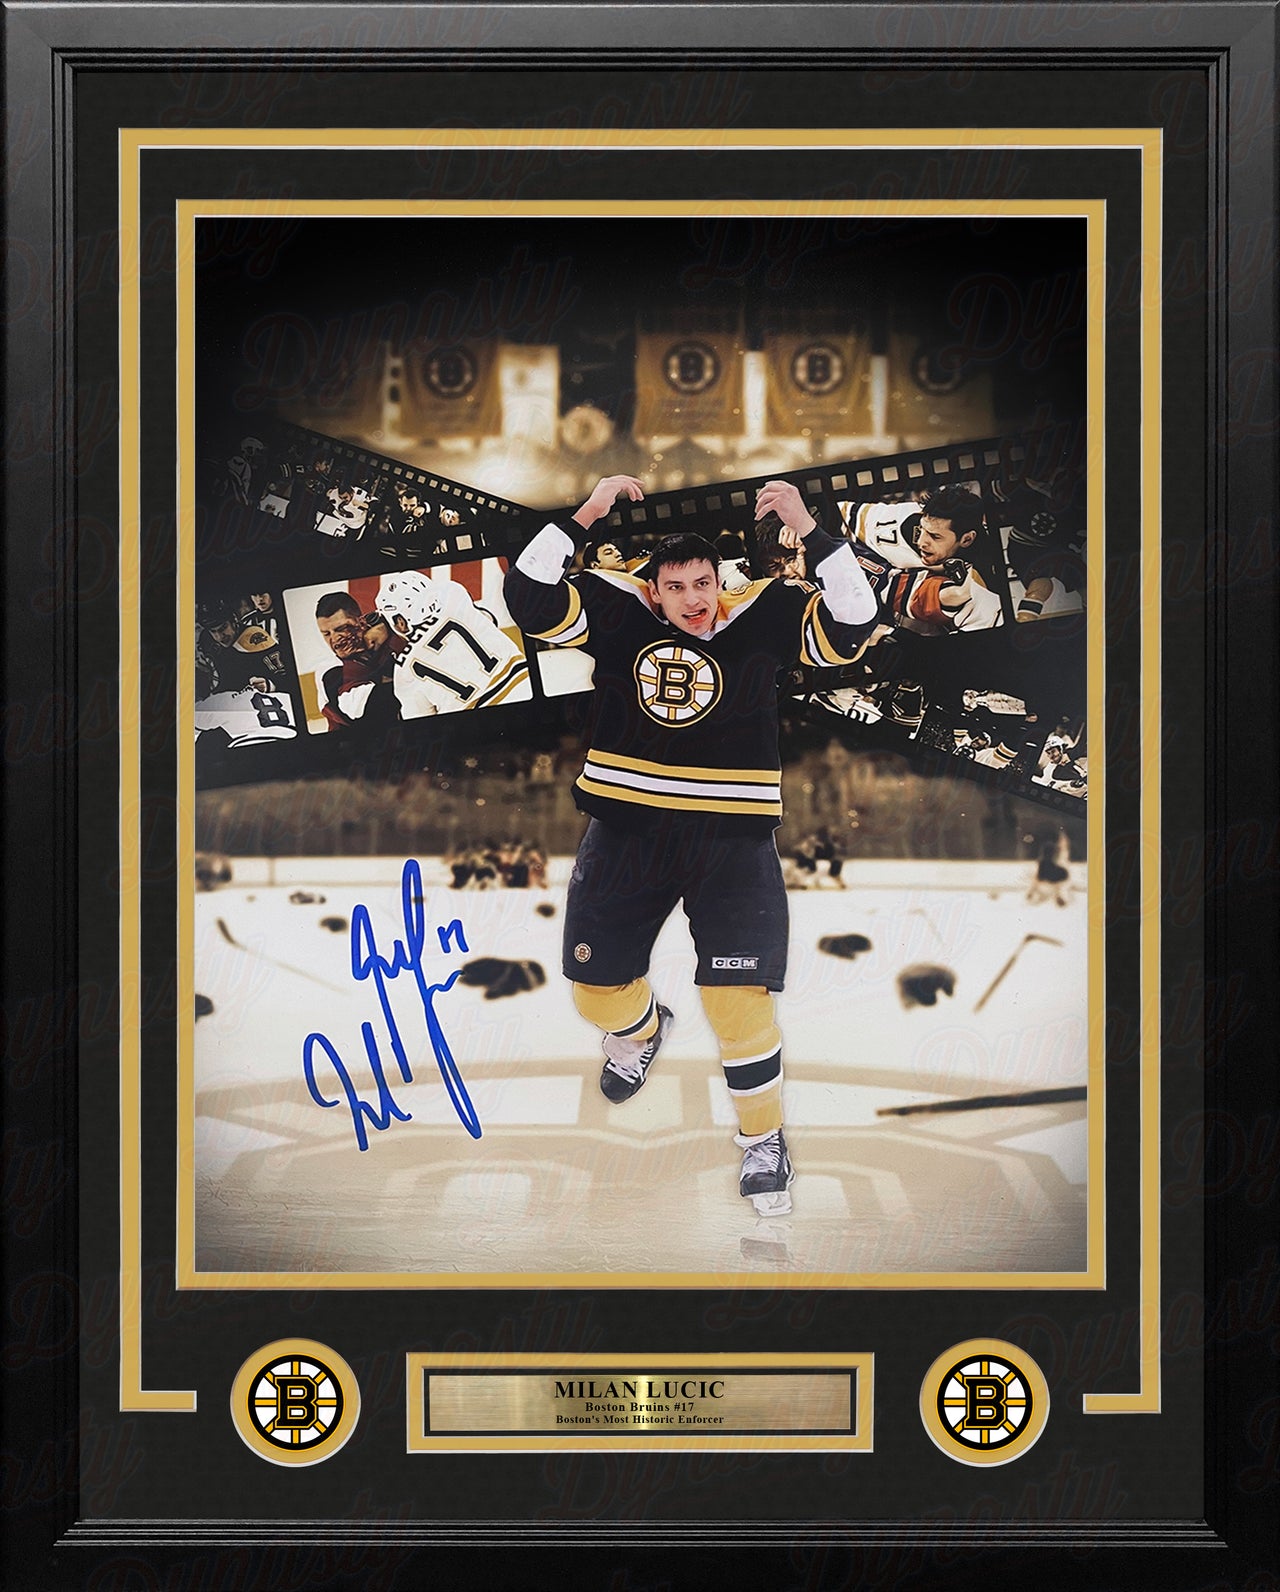 Milan Lucic Fight Collage Boston Bruins Autographed 11" x 14" Framed Hockey Photo